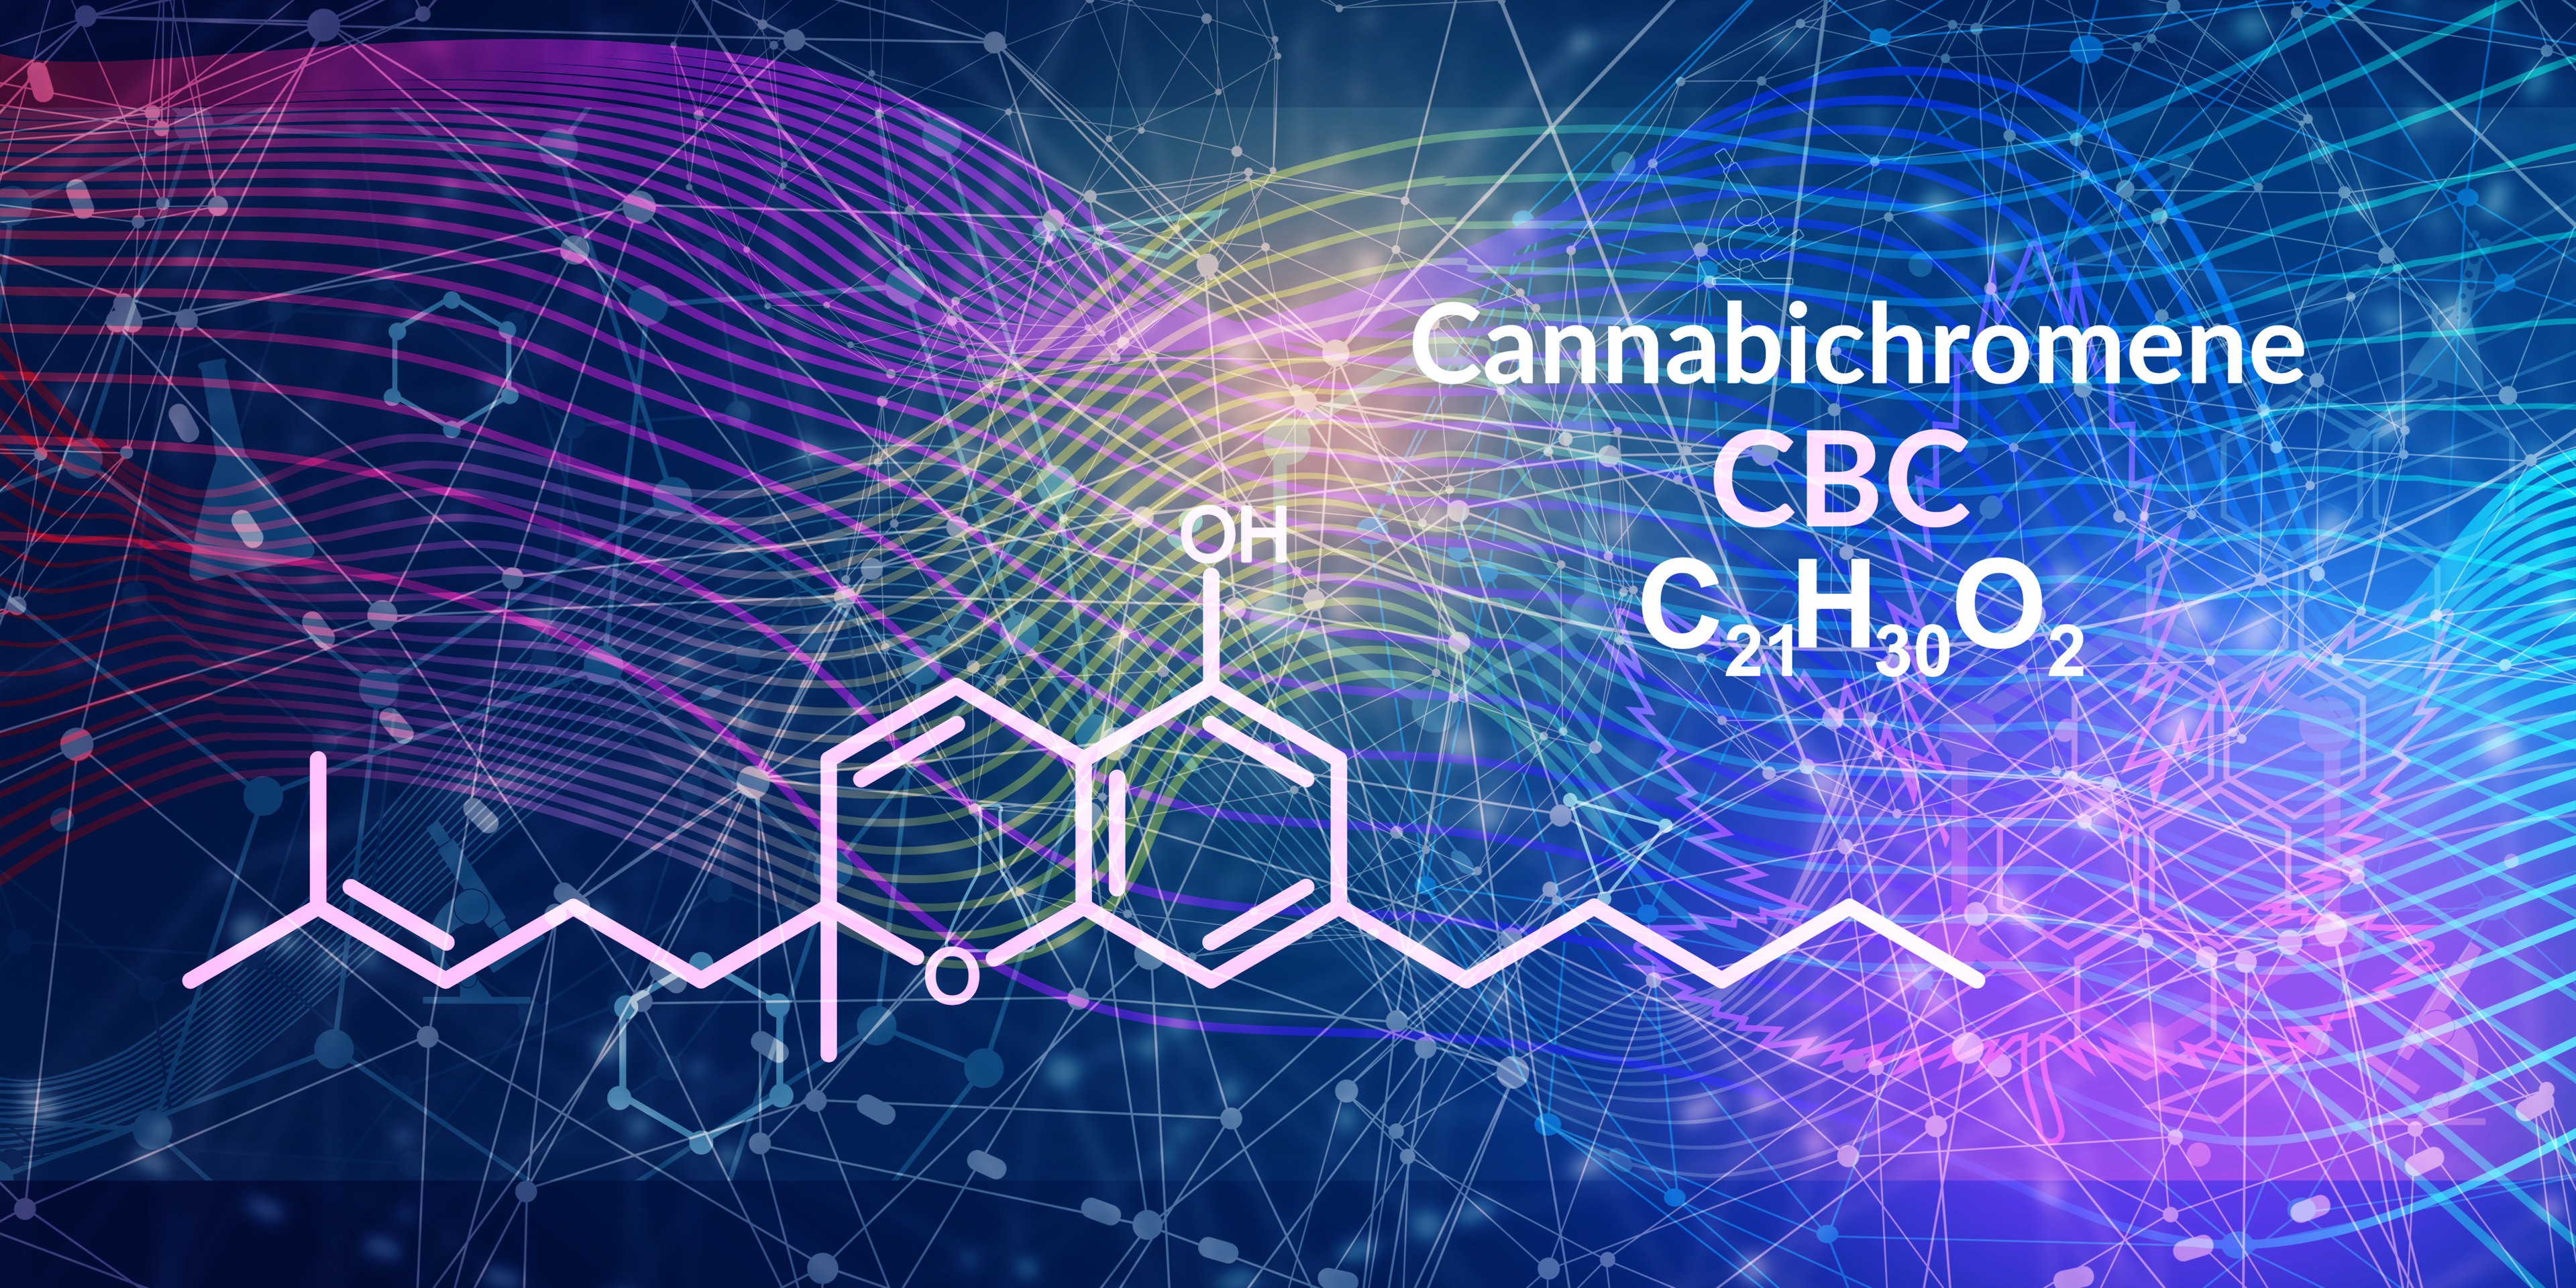 CBC can potentiate the effects of others like delta 6a10a THC, 10, delta 8 THC, 9 THC, CBD, and more from delta 6a10a THC.